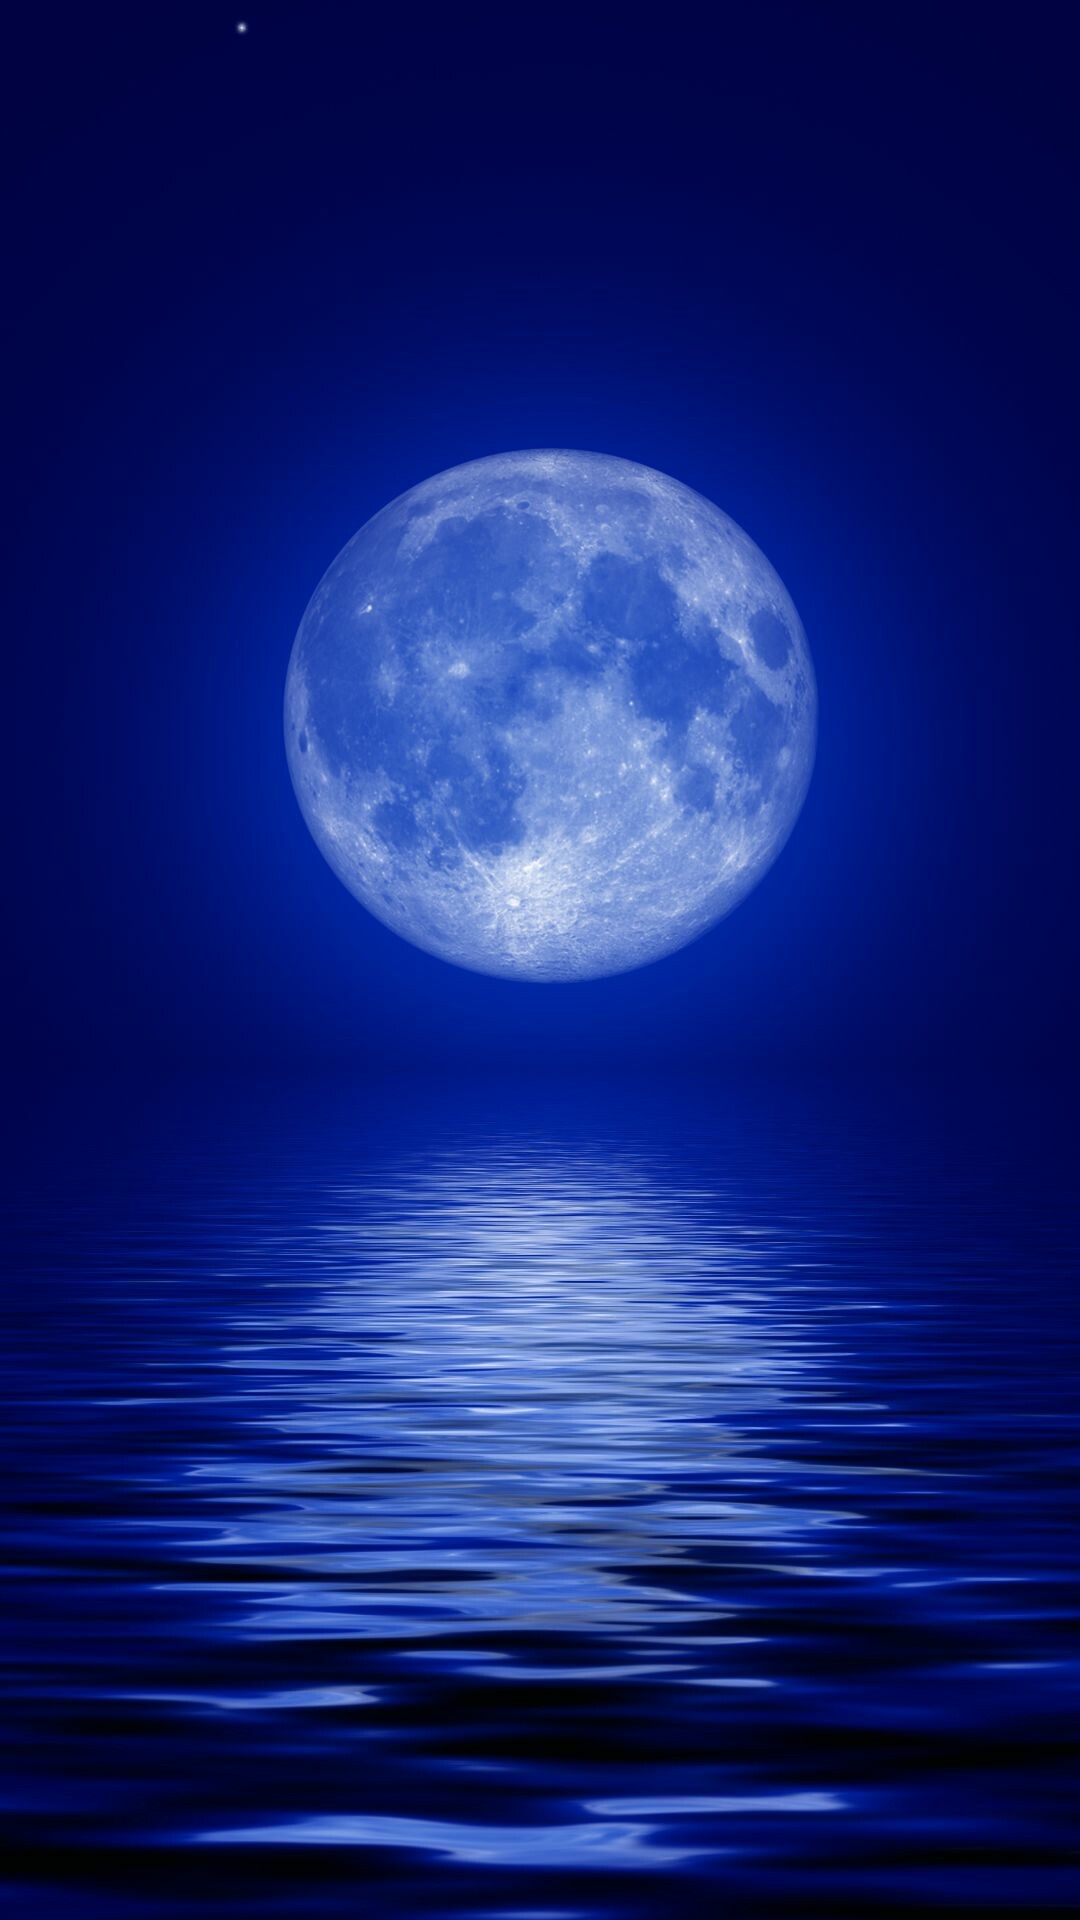 Moonlight: The light of the moon, Lunar disk viewed from Earth. 1080x1920 Full HD Background.